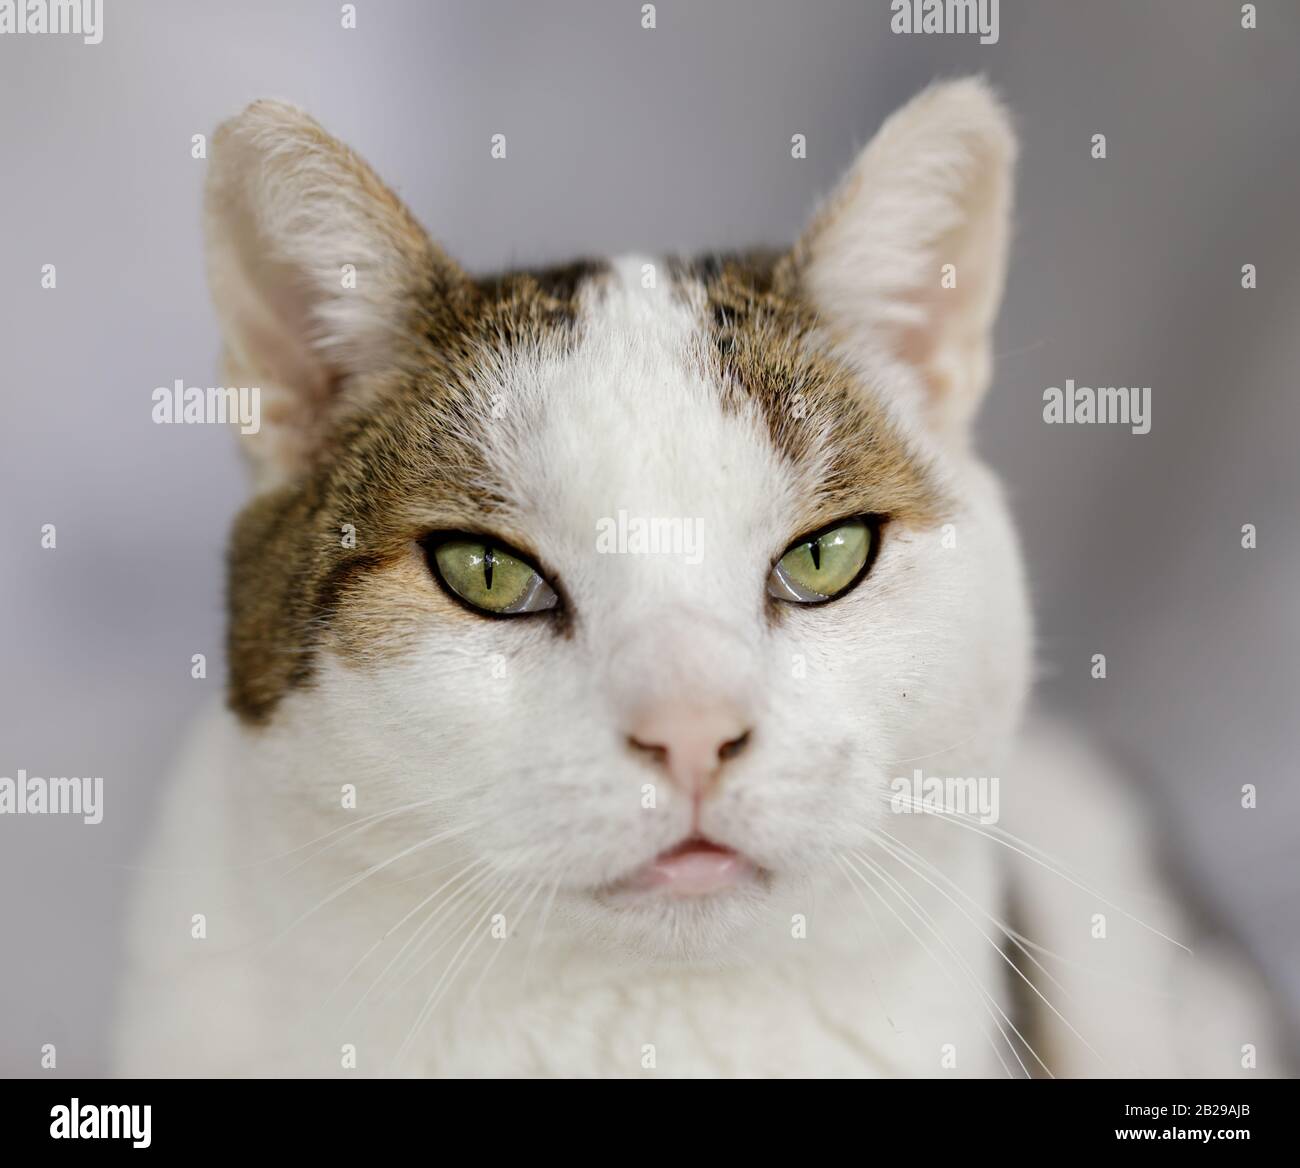 Green-eyed Short-haired Cat Head Looking at Camer Stock Photo